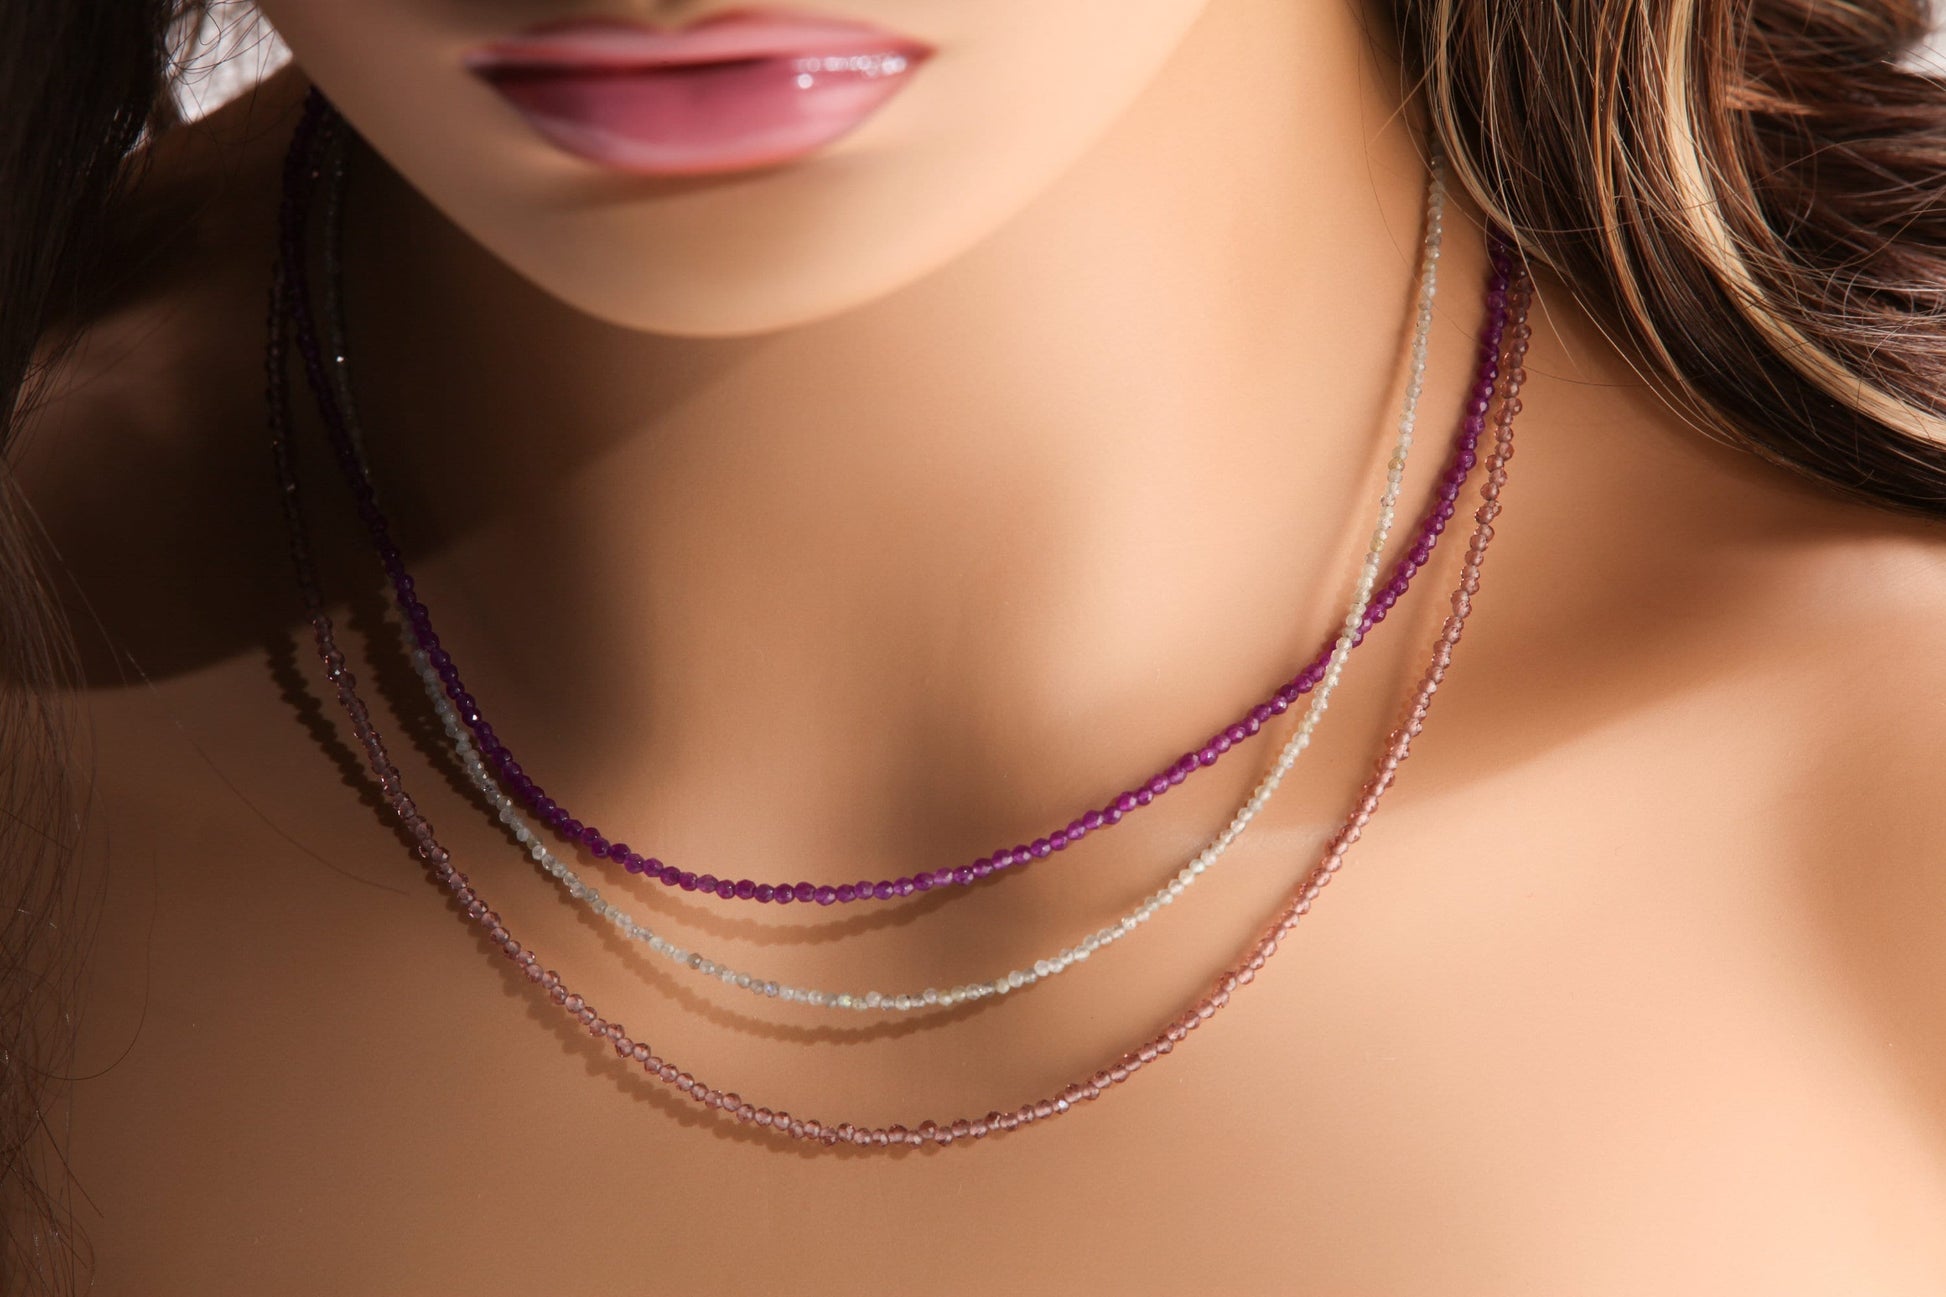 2mm Faceted Purple Amethyst, Labradorite, Pink Amethyst Layering Choker Necklace in 925 Sterling Silver or 14K Gold Filled Clasp